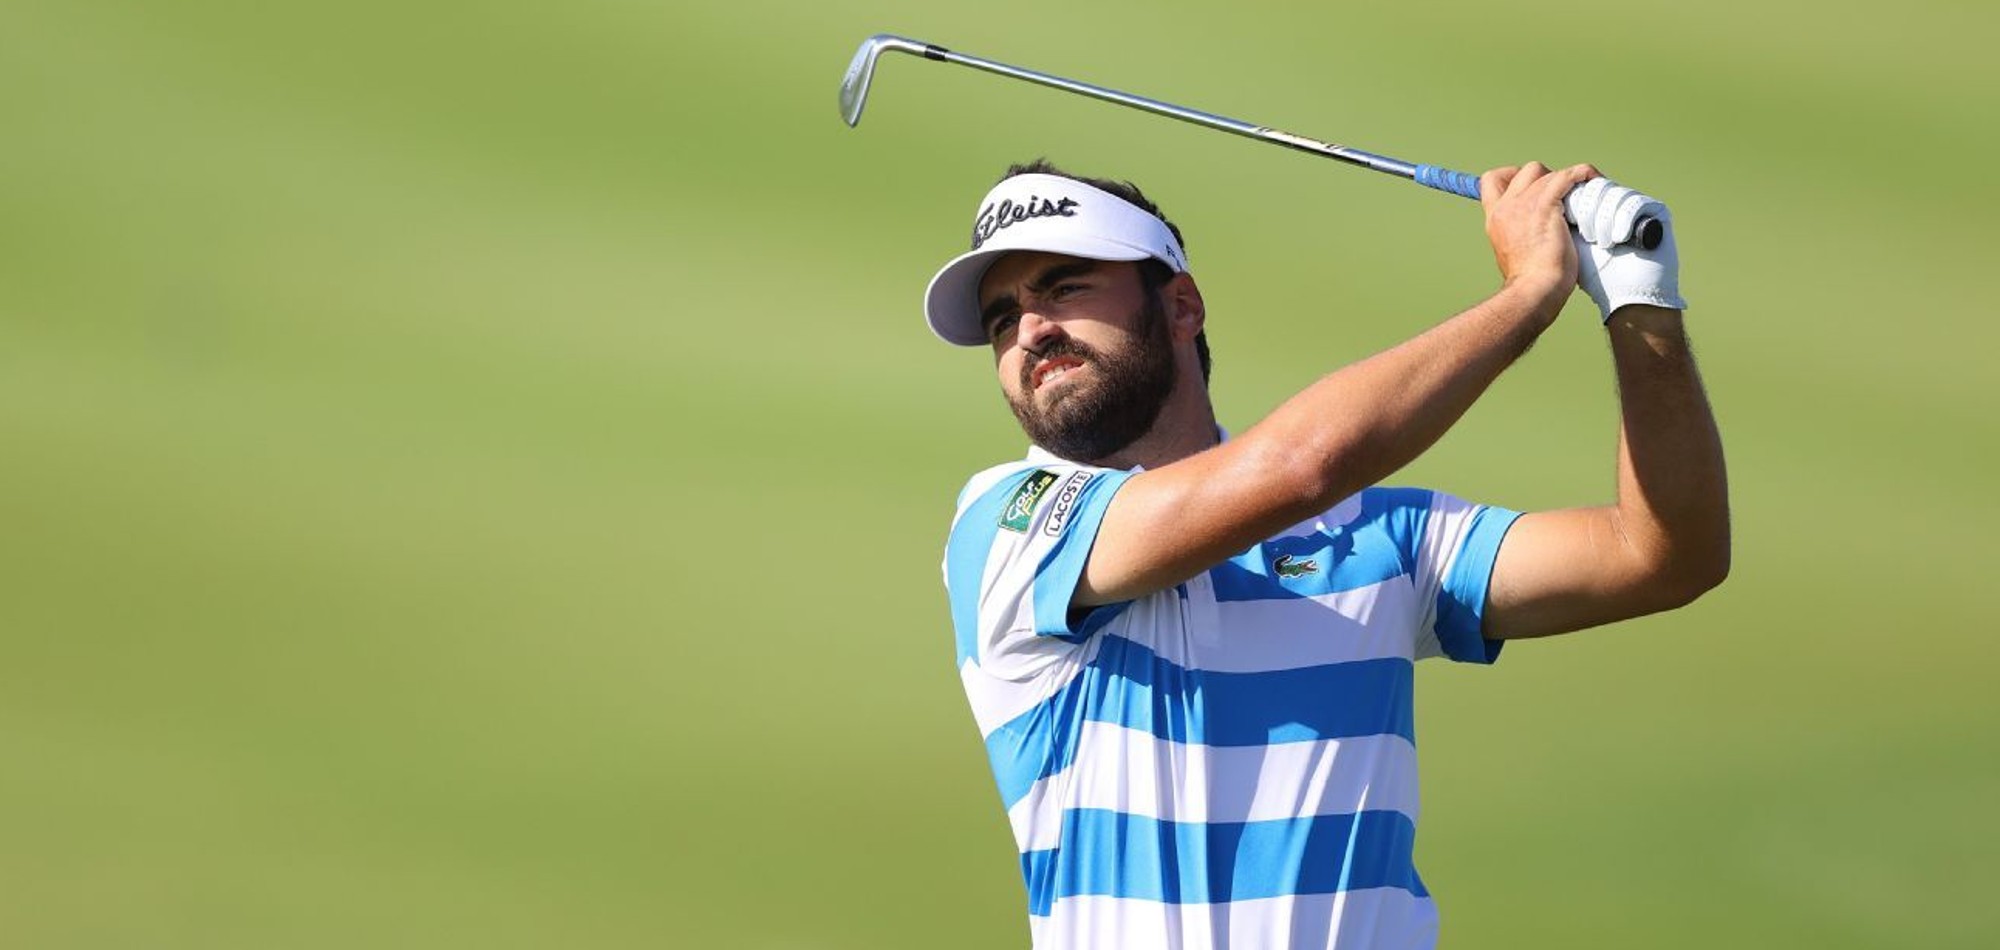 New-look DGC greens to test Rozner’s bid to defend title